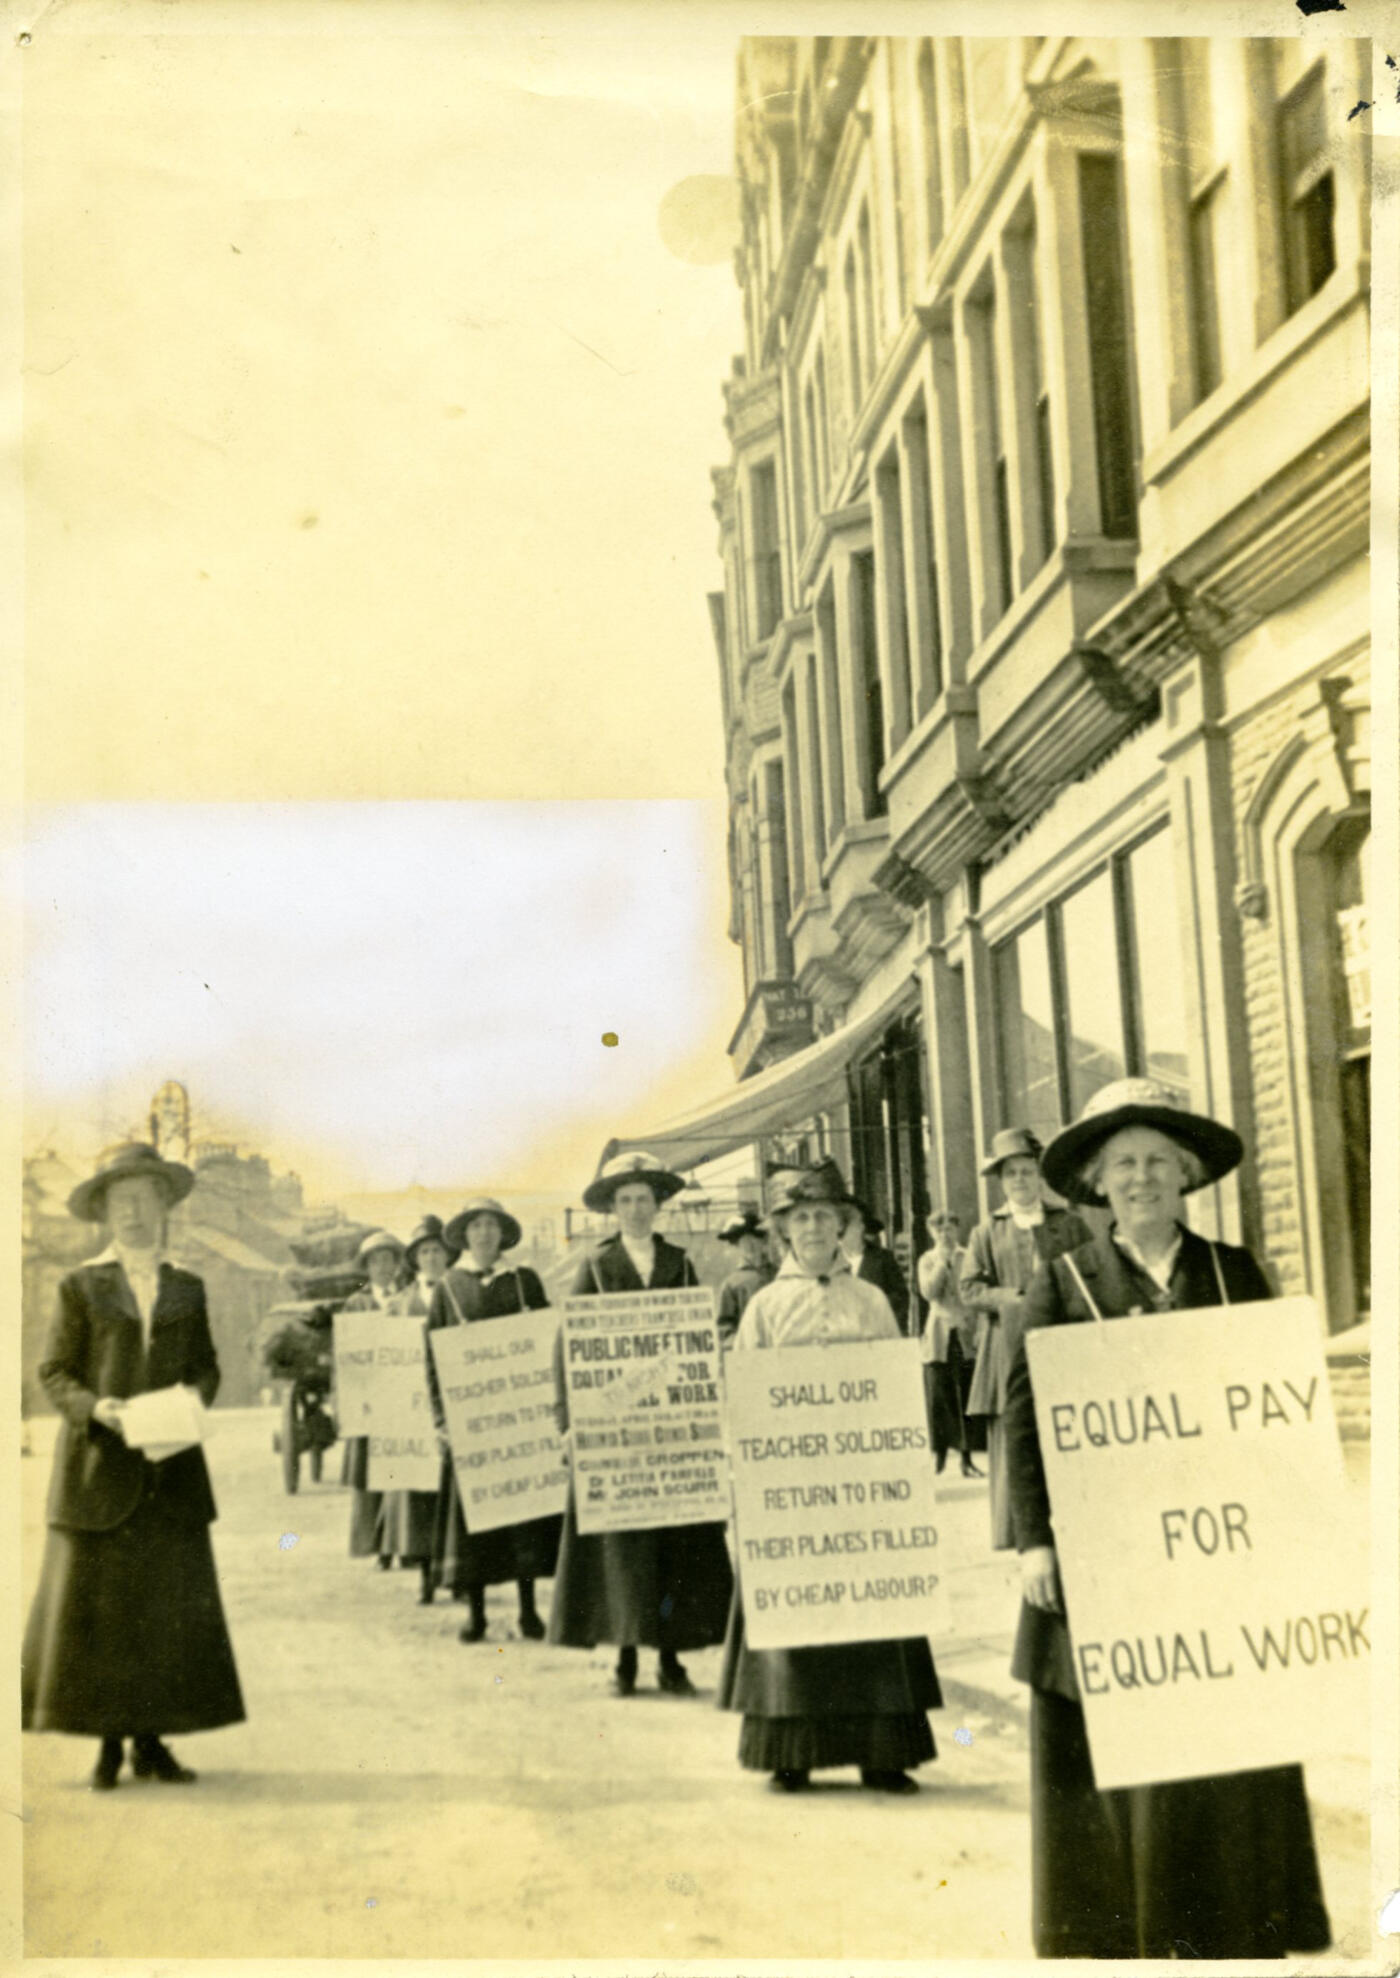 Photograph of women holding placards at NUWT equal pay demonstration